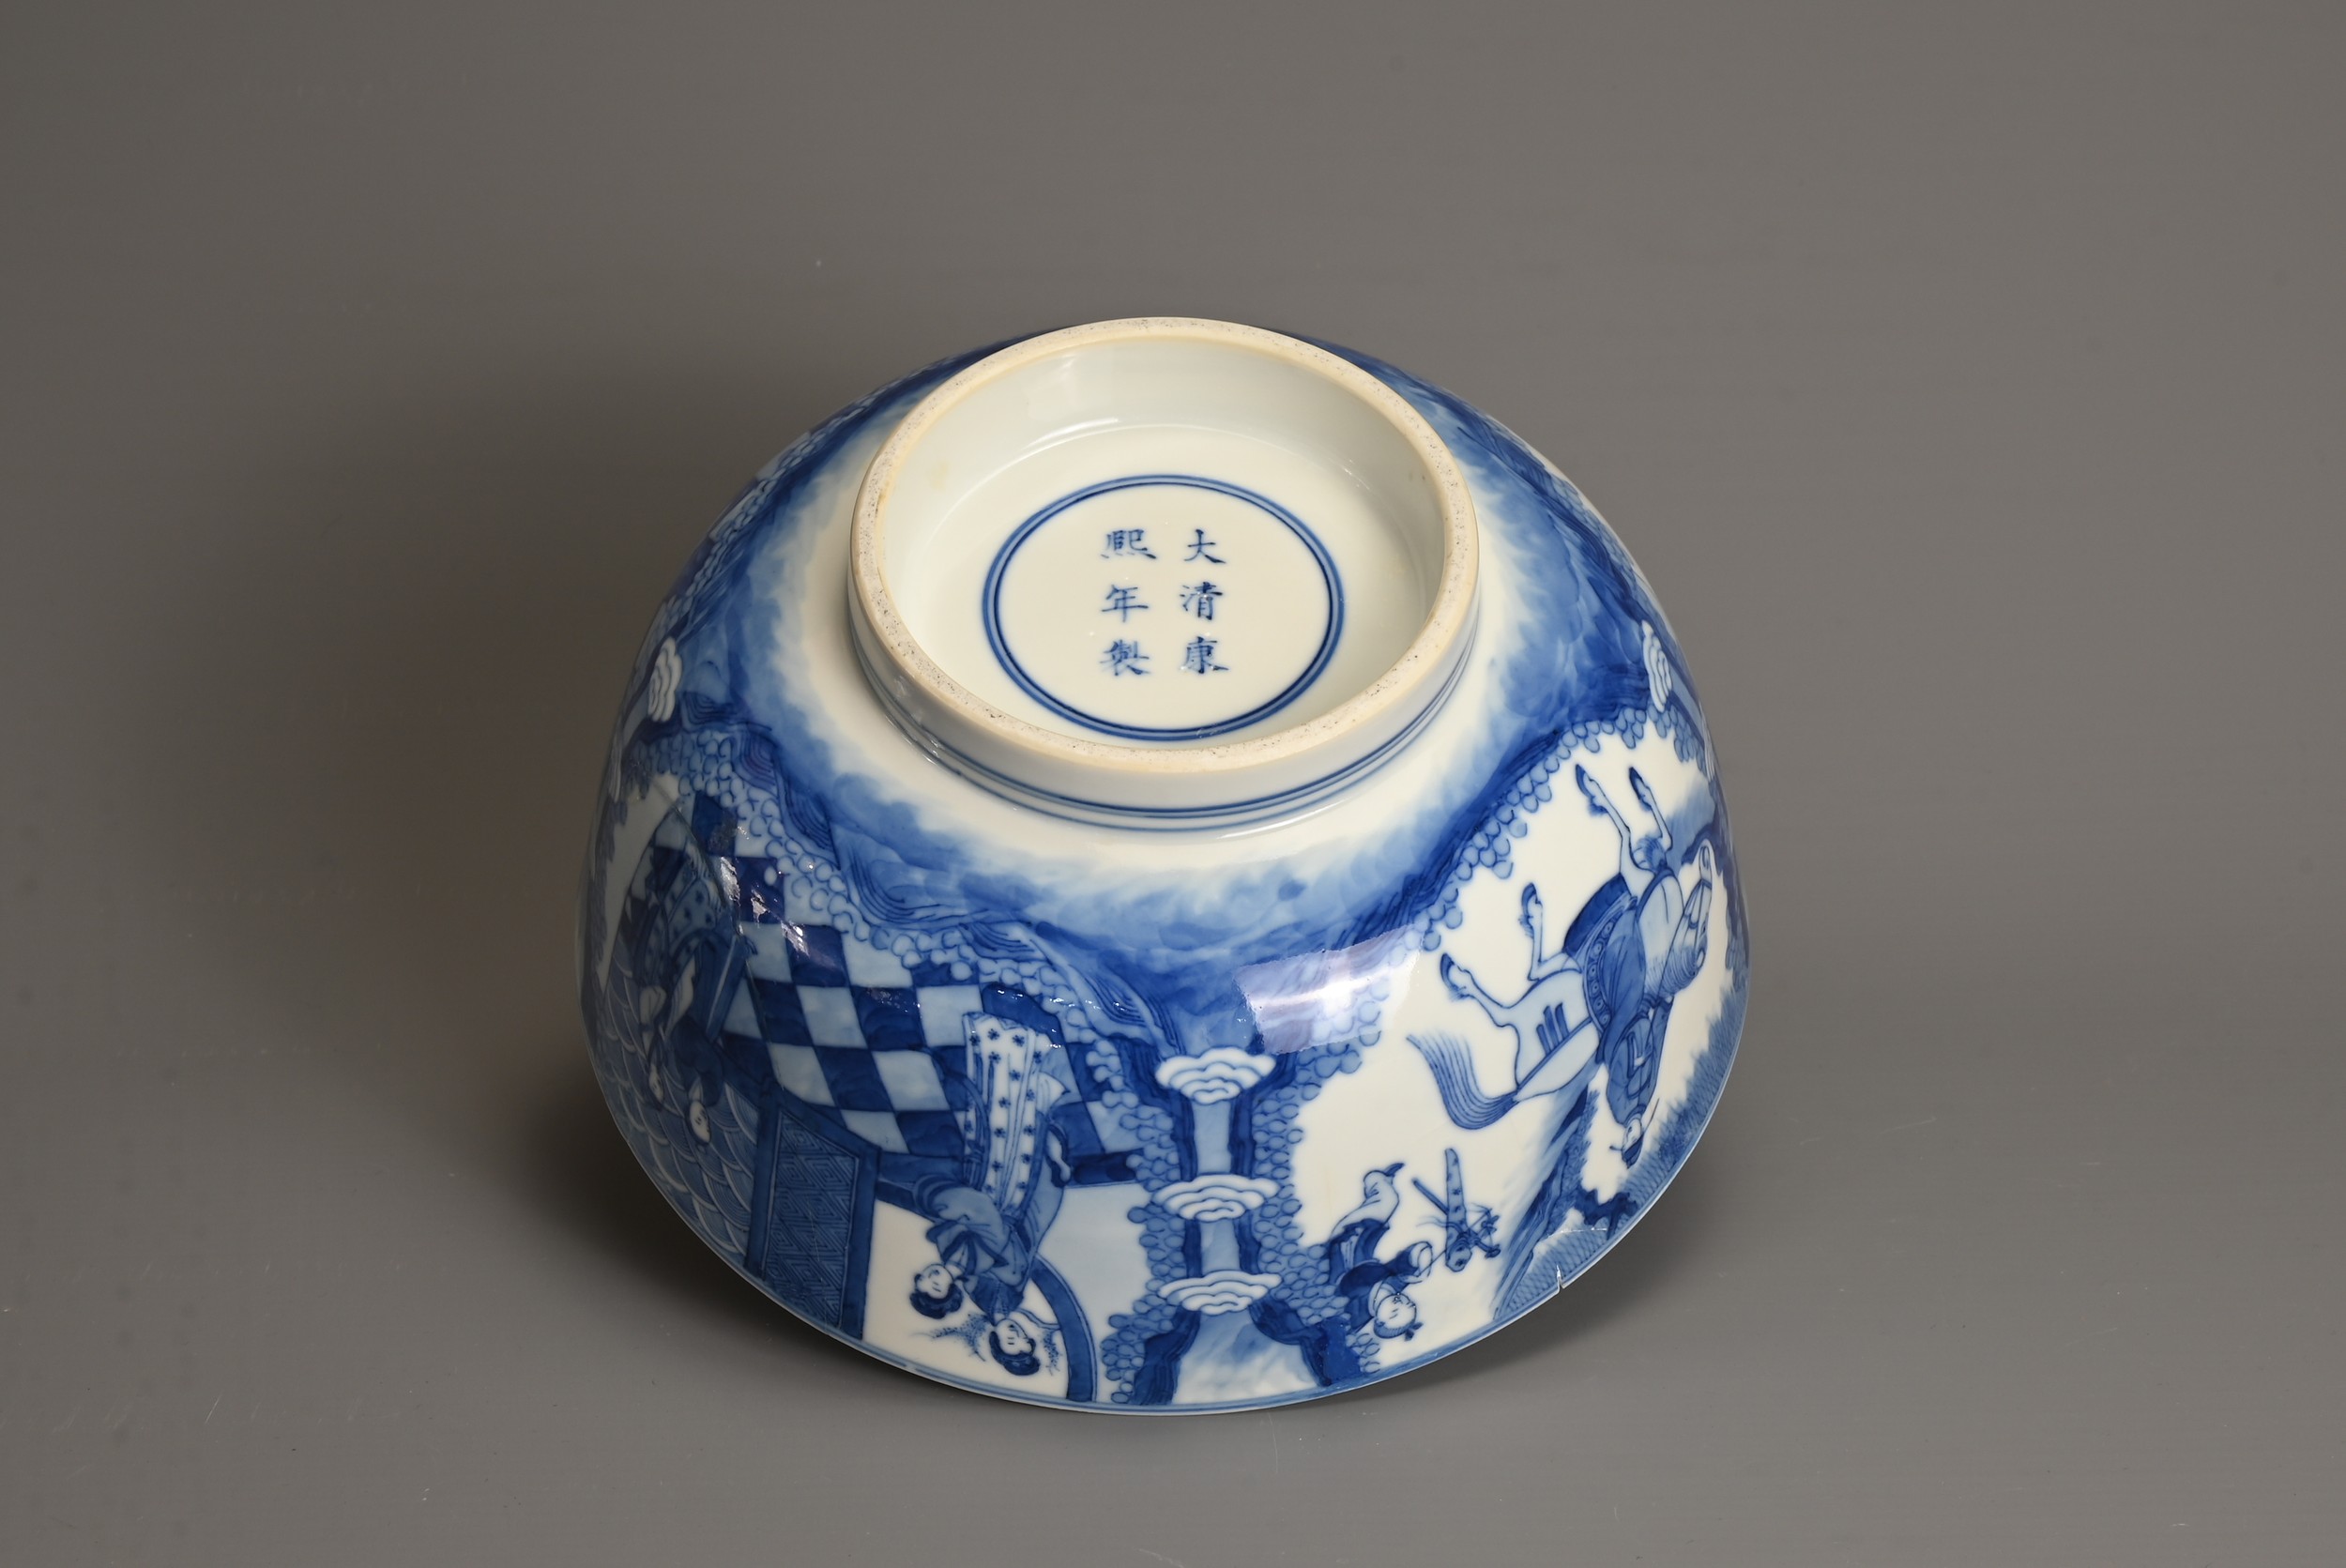 A CHINESE BLUE AND WHITE PORCELAIN BOWL, KANGXI PERIOD. Decorated with scene from the 'Romance of - Image 7 of 9